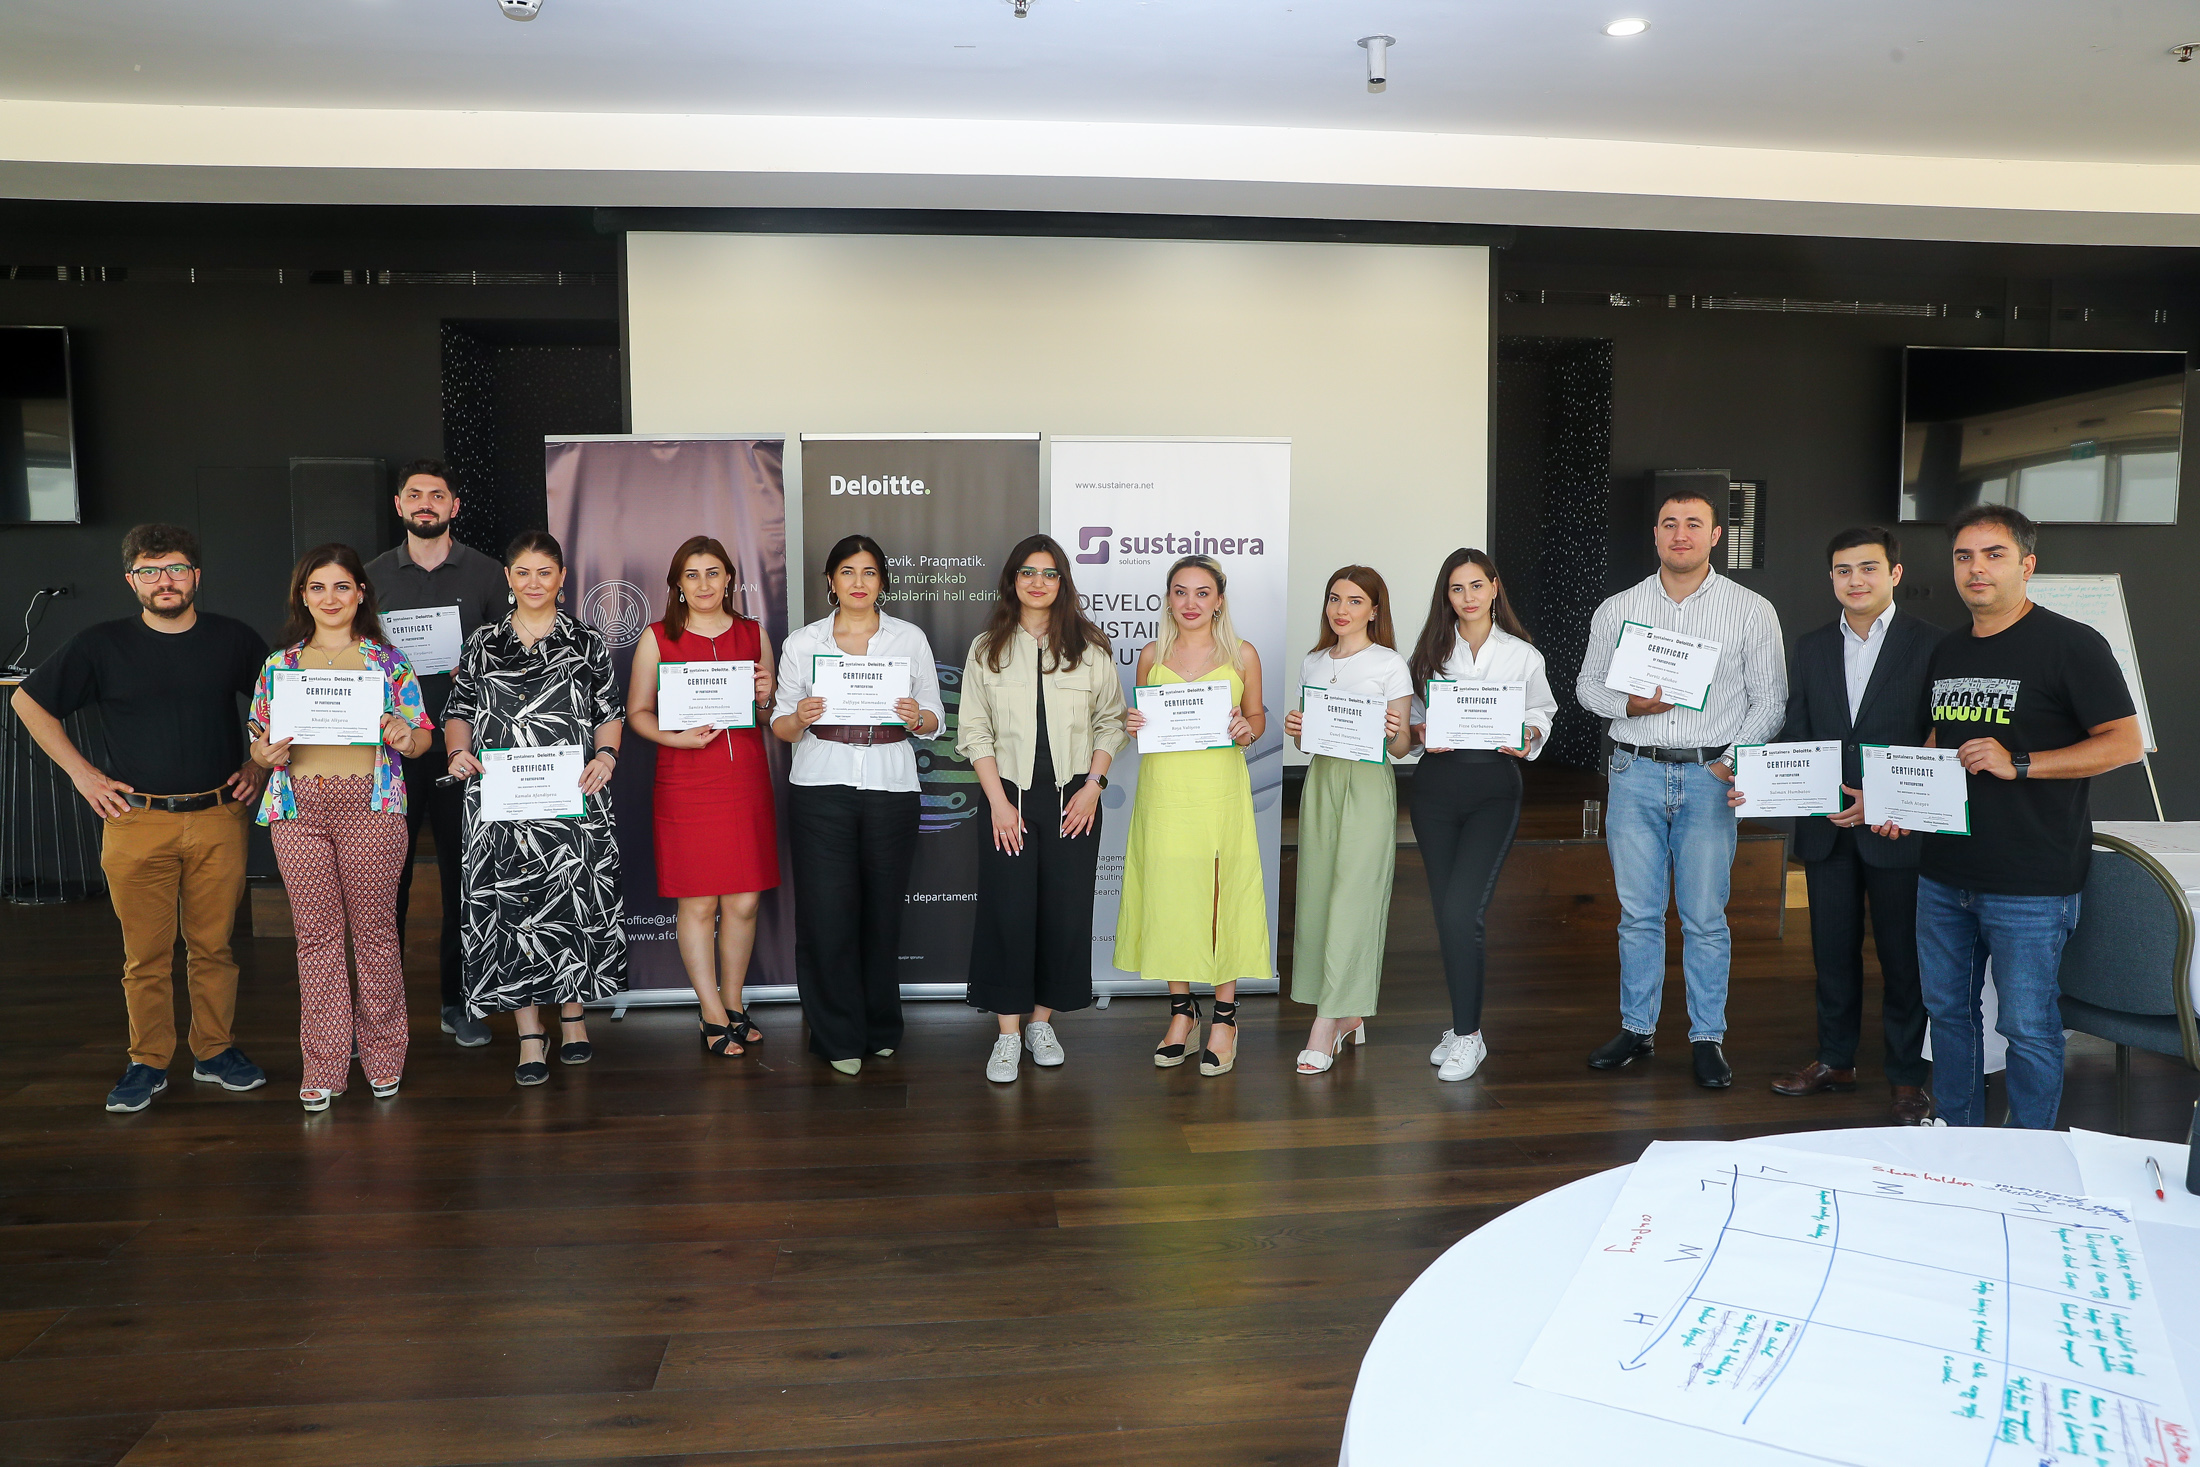 AFchamber ESG Committee, in partnership with Sustainera Research & Consulting, Deloitte in Azerbaijan and UN Global Compact, successfully organized a two-day training program on “Corporate Sustainability”.